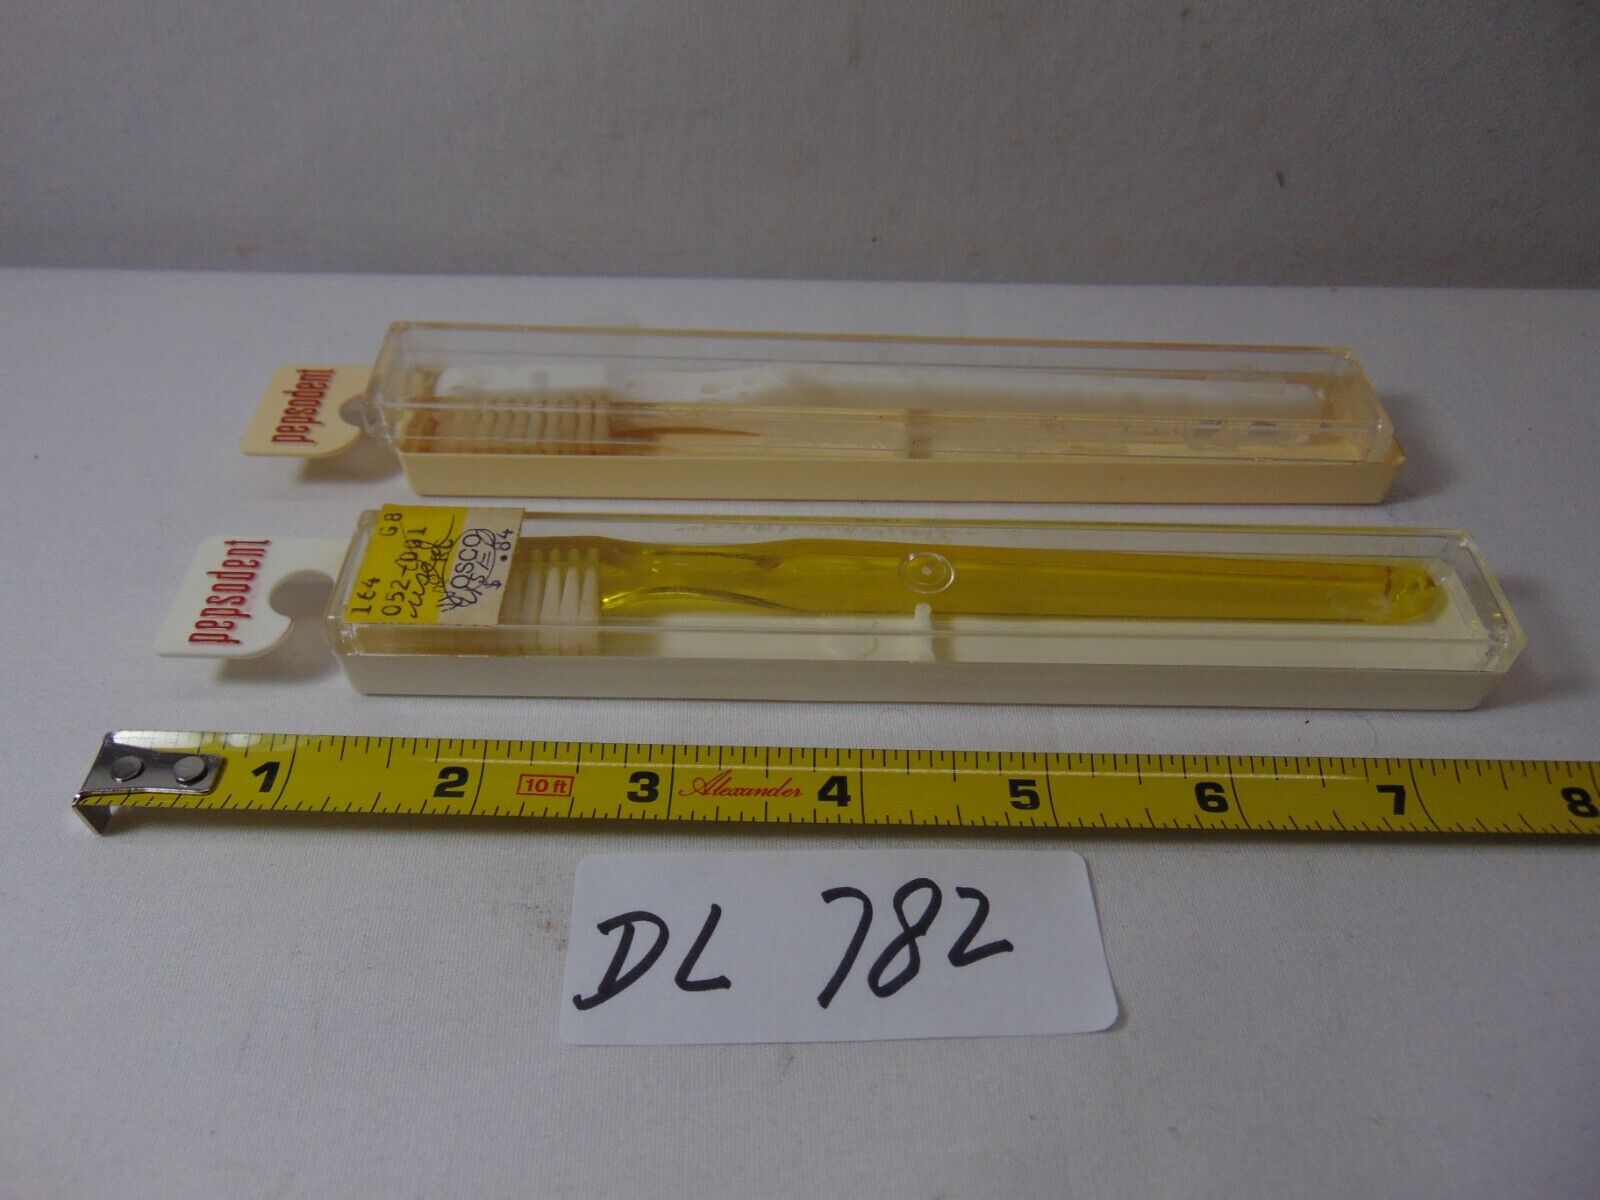 Vintage Pepsodent Toothbrush Lot of 2 Hard Clear Plastic Case Lot White & Yellow